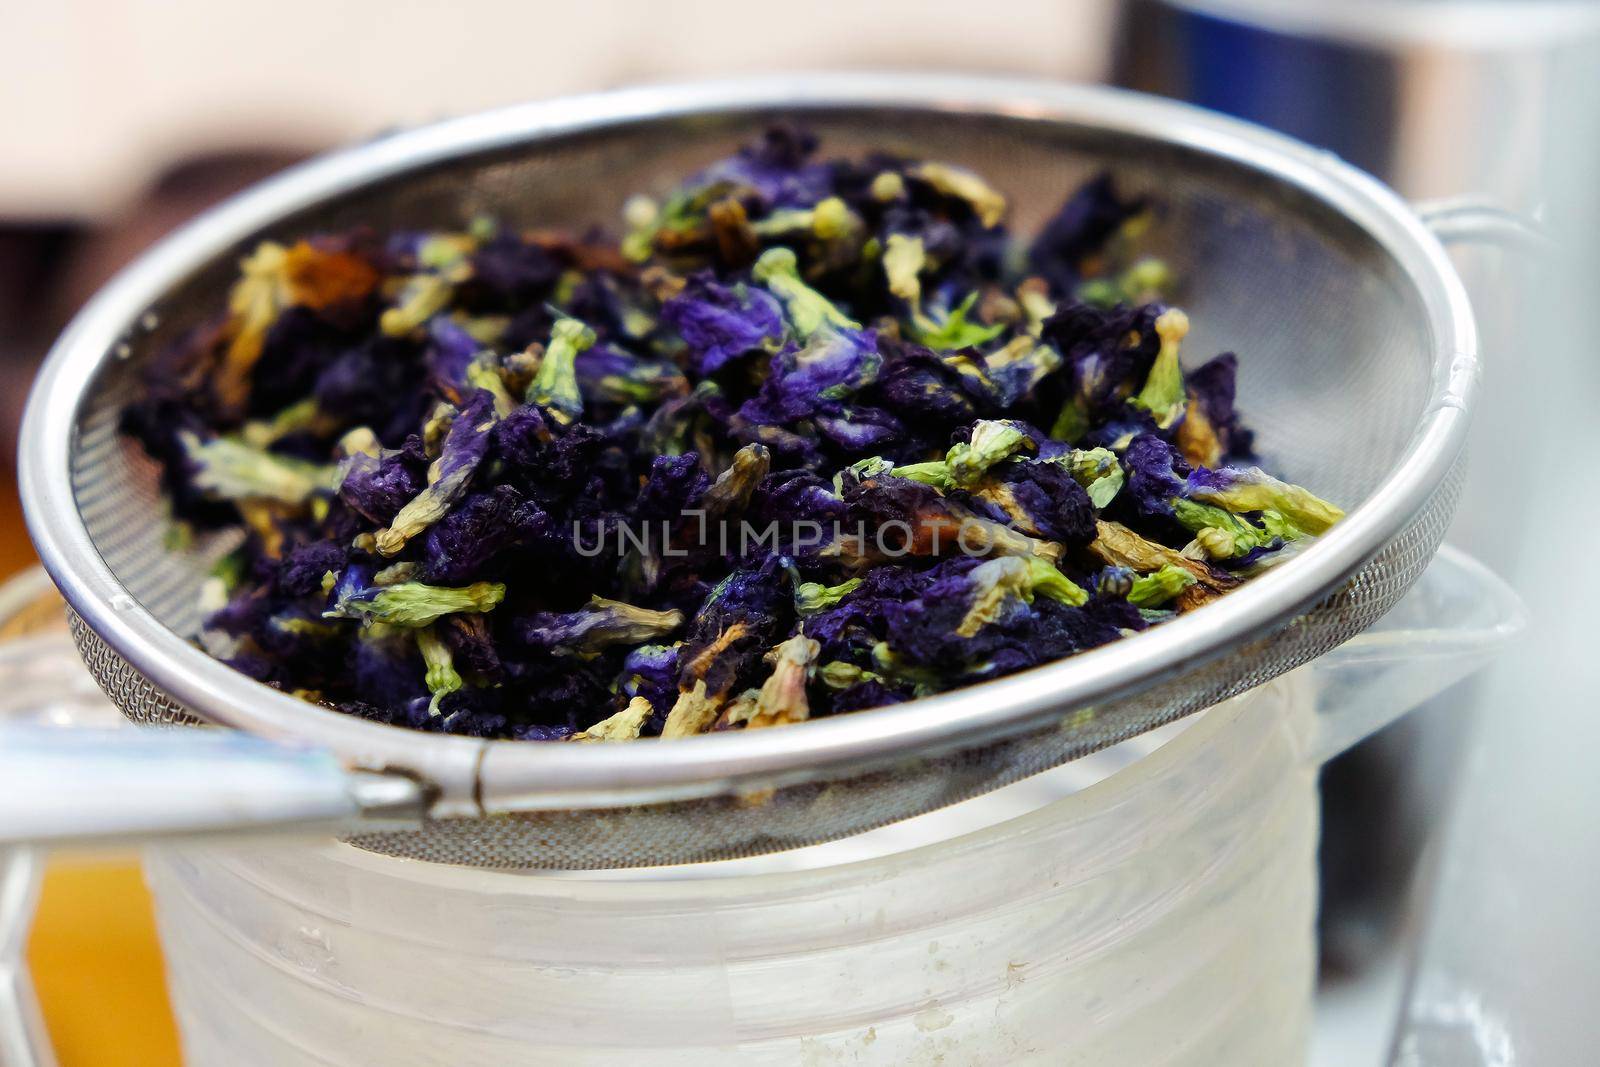 dried butterfly pea, The process of making Butterfly Pea Juice by the traditional Thai method.